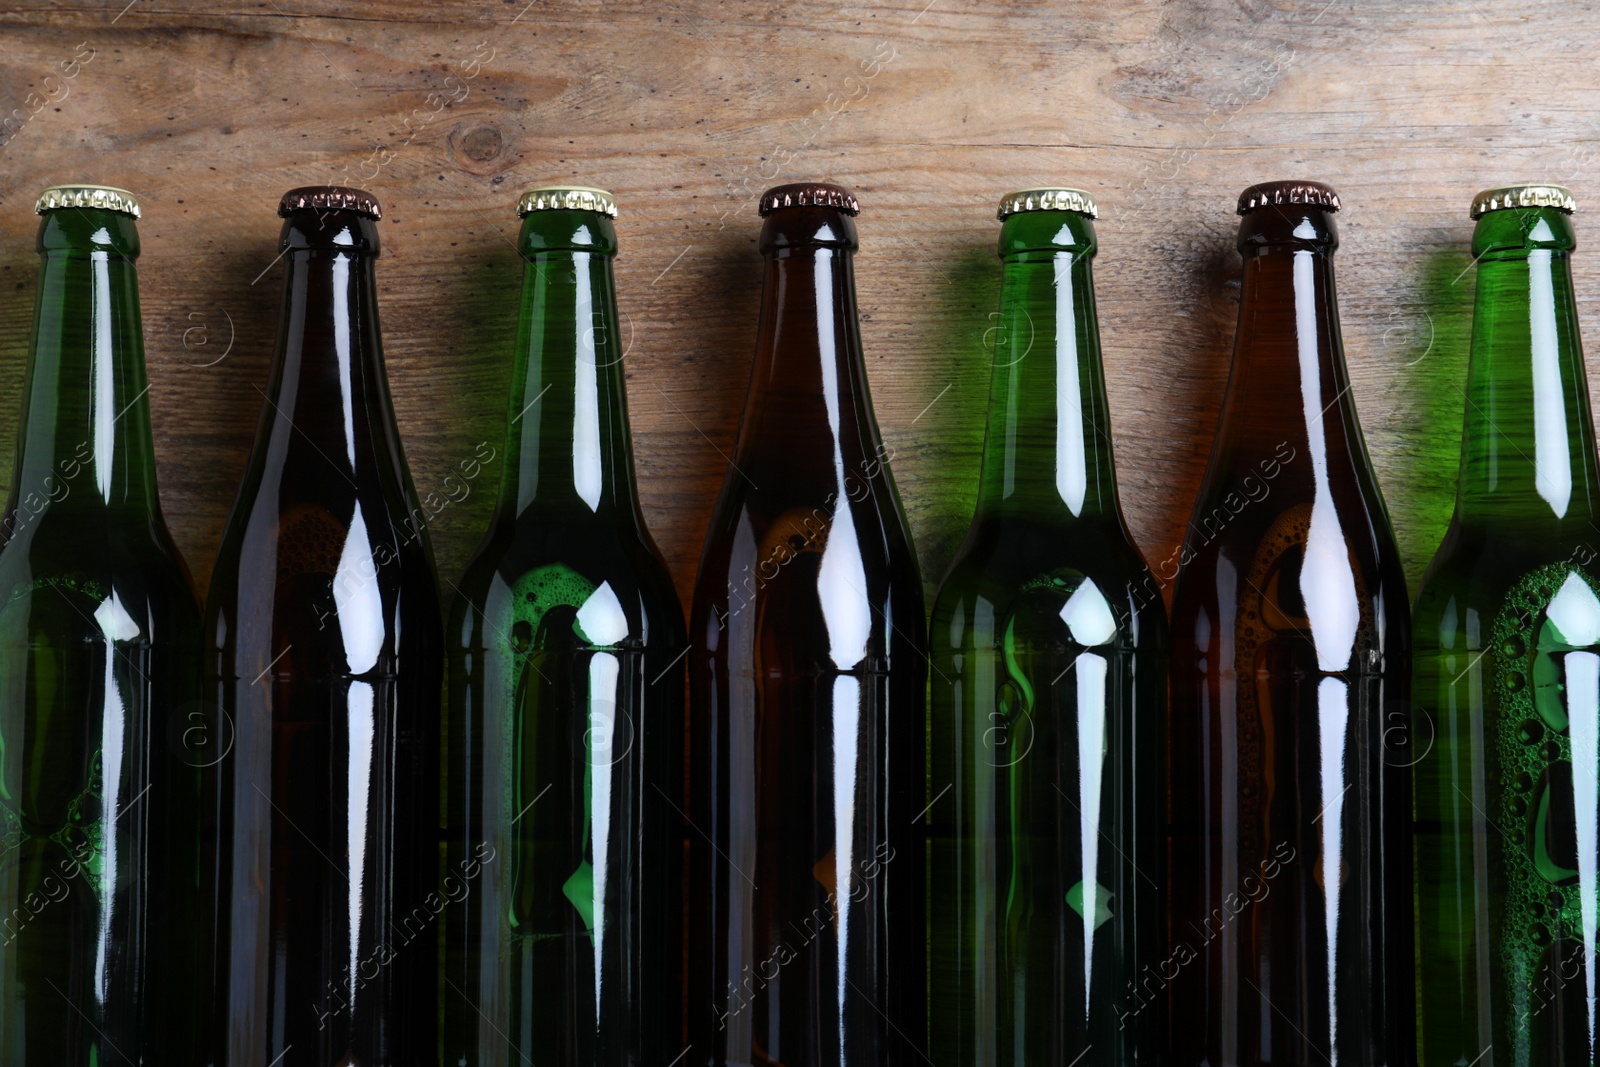 Photo of Bottles of beer on wooden table, flat lay